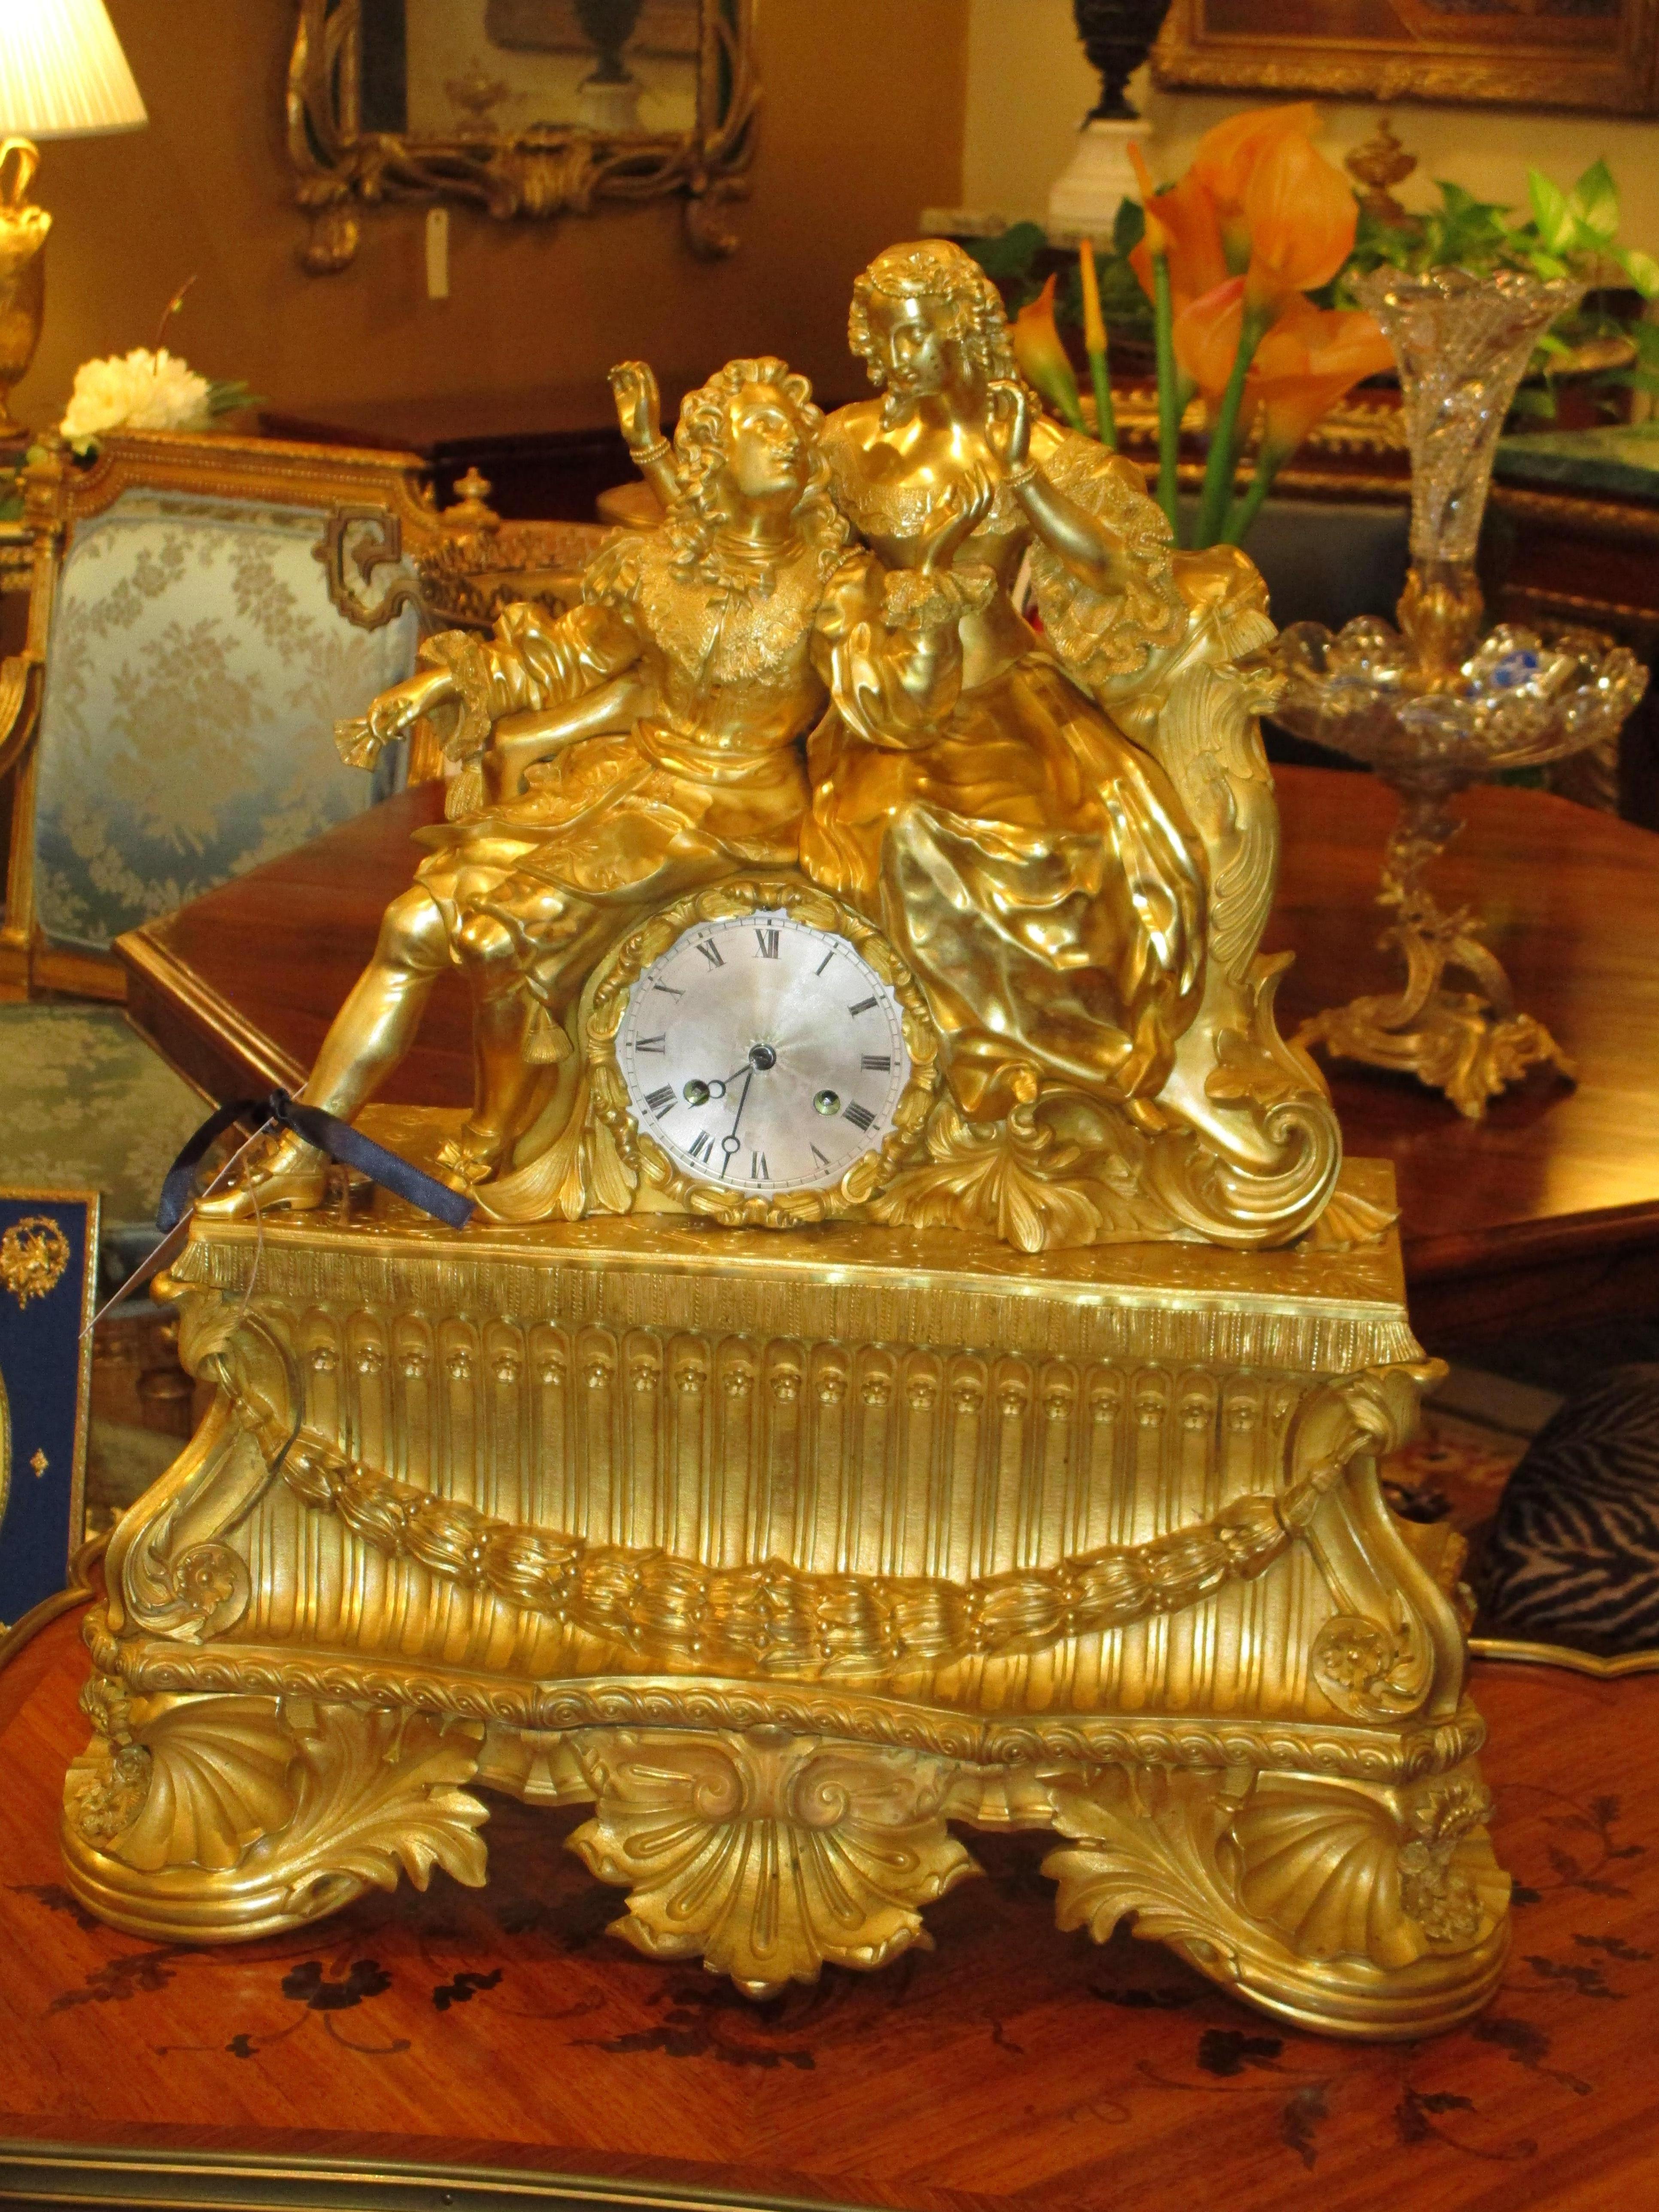 19th Century A fine large 19th century French fire gilt bronze mantel clock.  For Sale